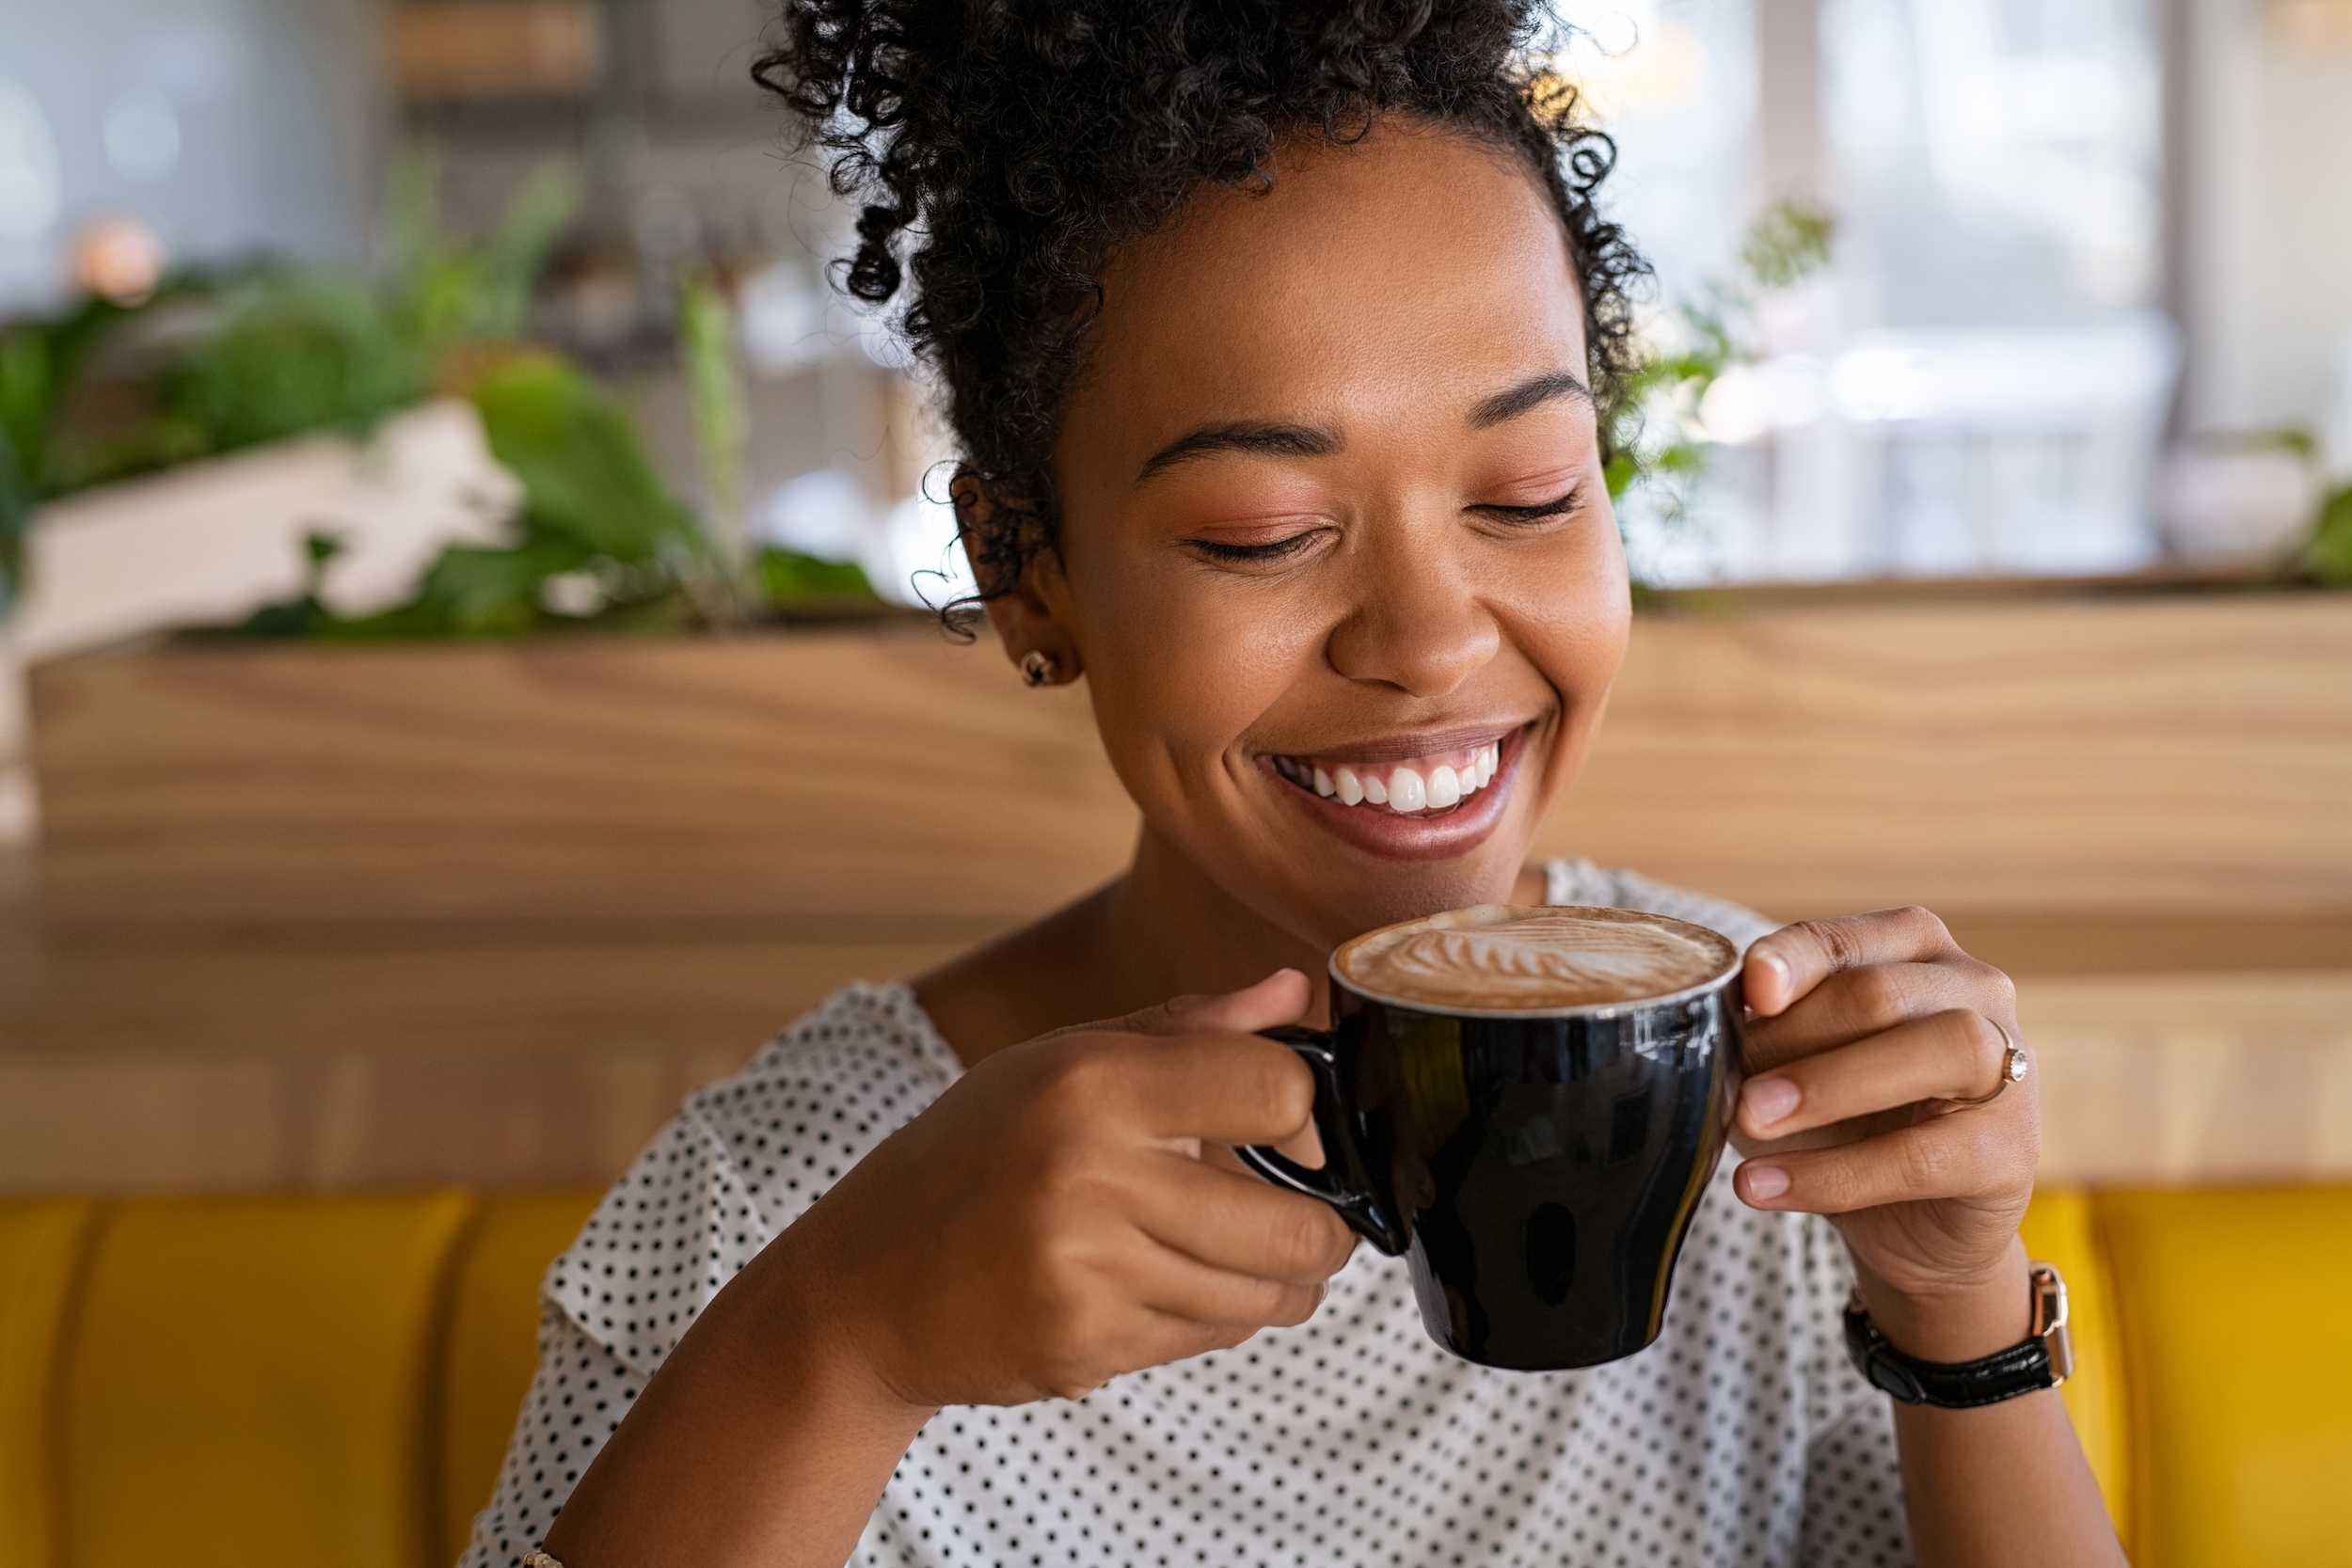 Woman-enjoying-a-latte-Photo-by-Ground-Picture-on-Shutterstock